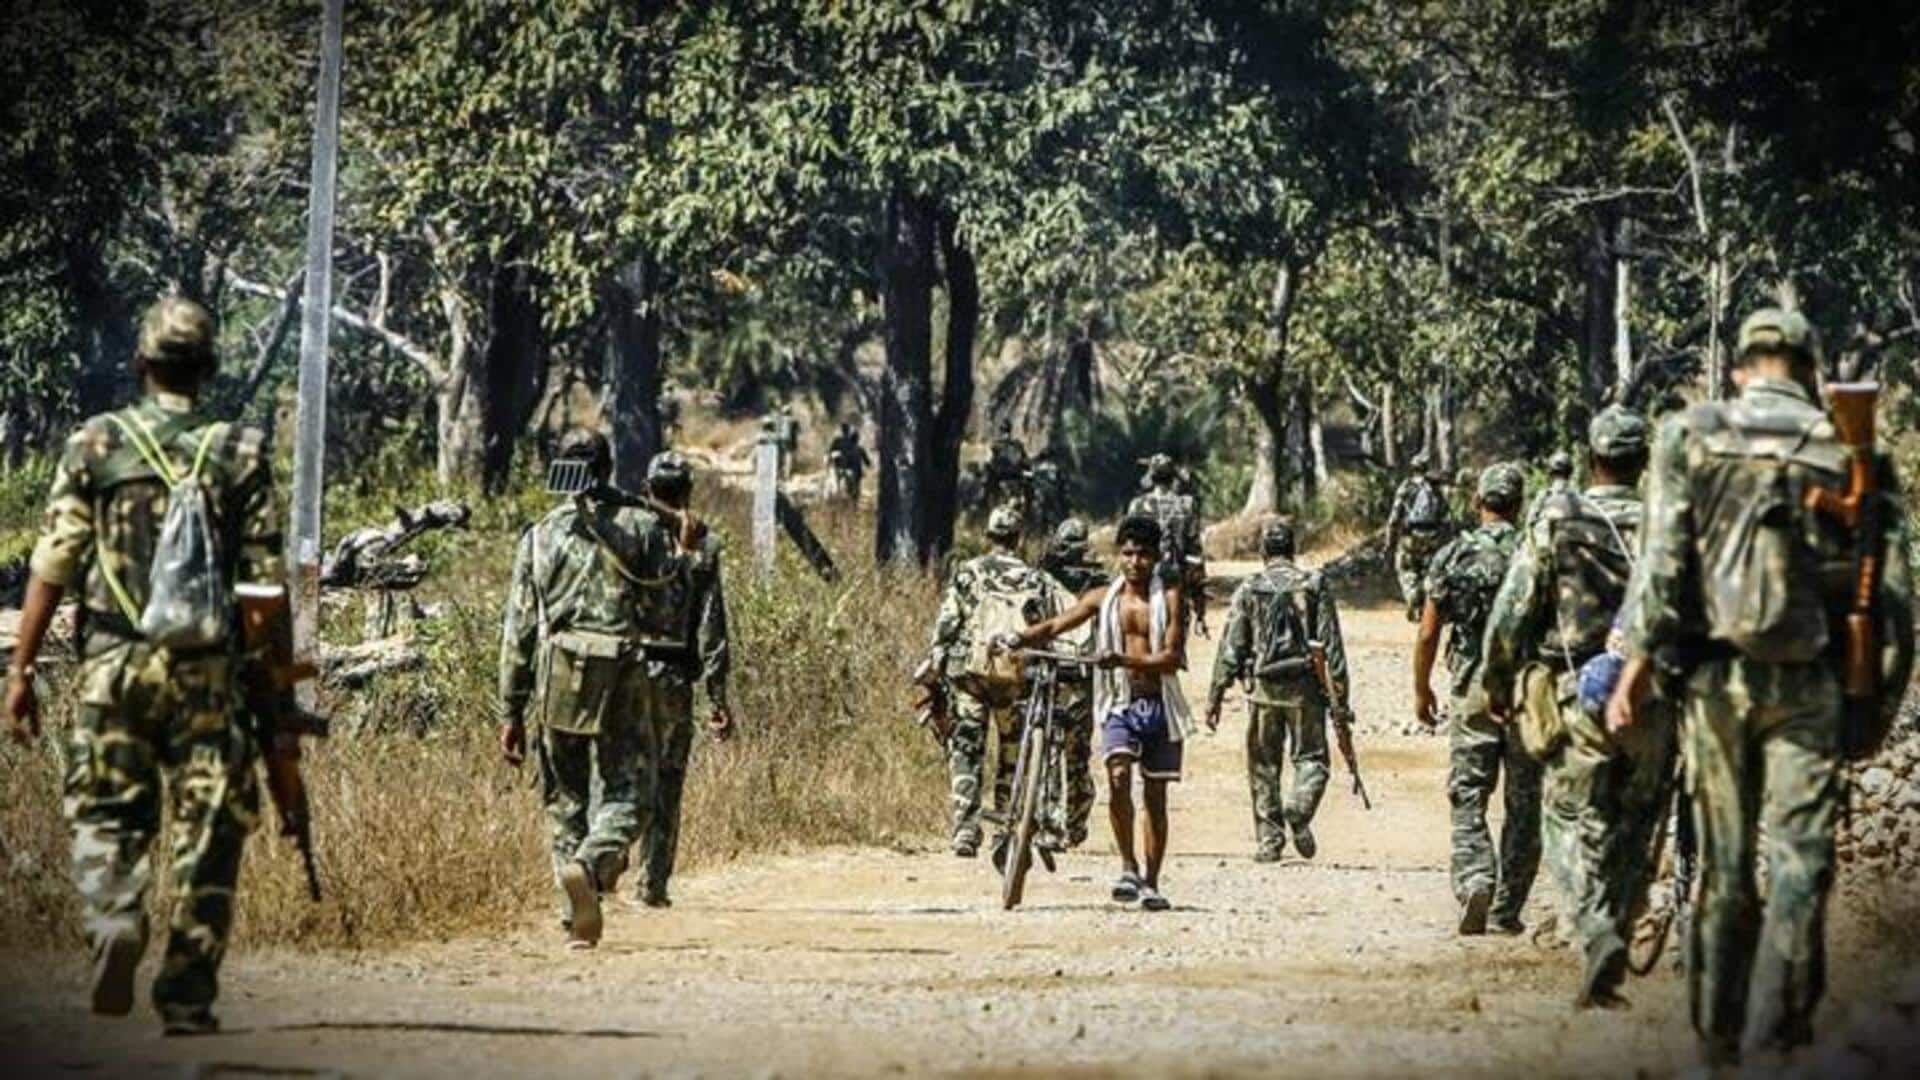 8 Maoists, one security personnel killed in Chhattisgarh encounter